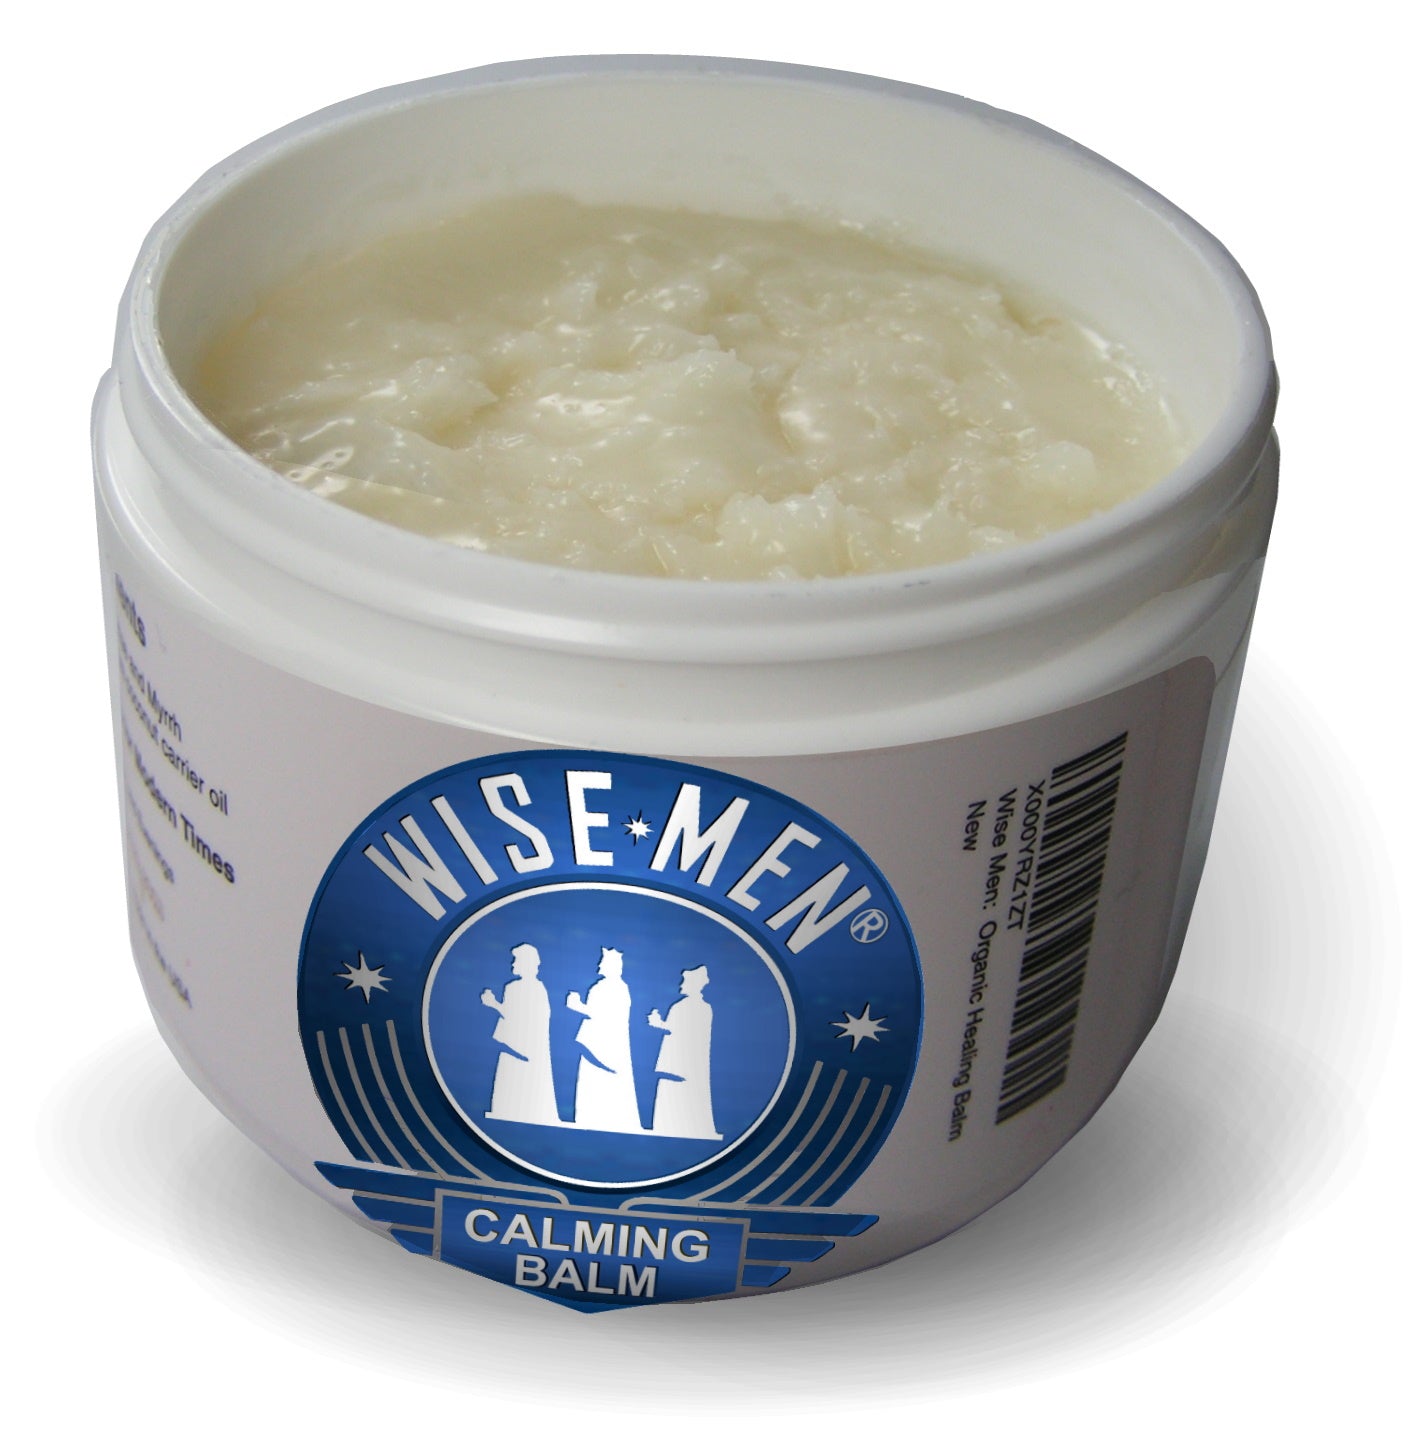 Wise Men Calming Balm - with Lavender, Chamomile and Frankincense Essential Oils